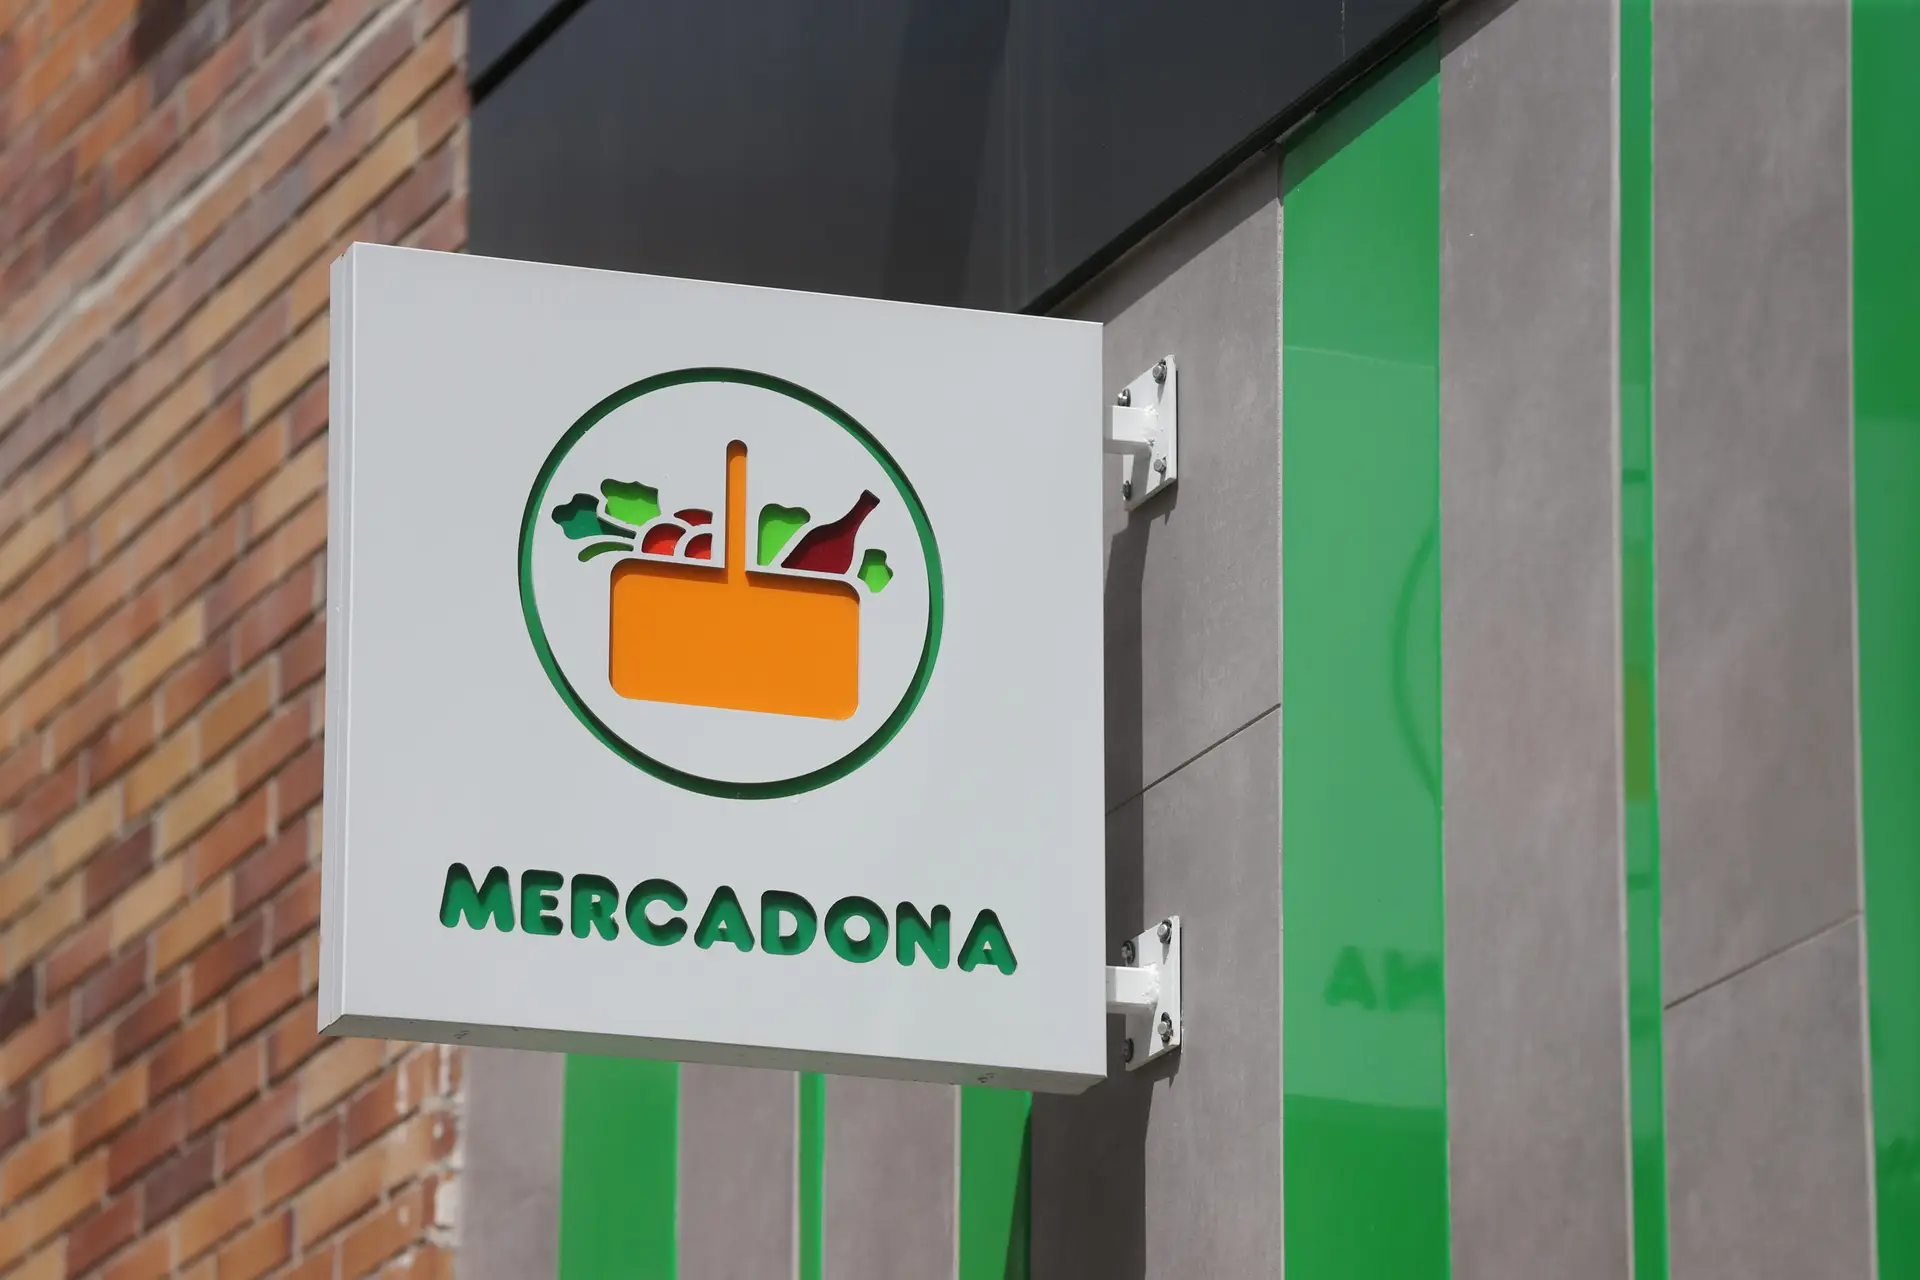 MADRID, SPAIN – JULY 23: Exterior of a Mercadona supermarket, on 23 July, 2021 in Madrid, Spain. This Thursday Mercadona ended the procedure opened by the Spanish Data Protection Agency (AEPD) after paying the 2.5 million euros penalty proposed by this body. The procedure was related to a pilot project tested in 48 stores of the company and consisted in the identification of people who had a restraining order in force from the establishment. (Photo By Isabel Infantes/Europa Press via Getty Images)